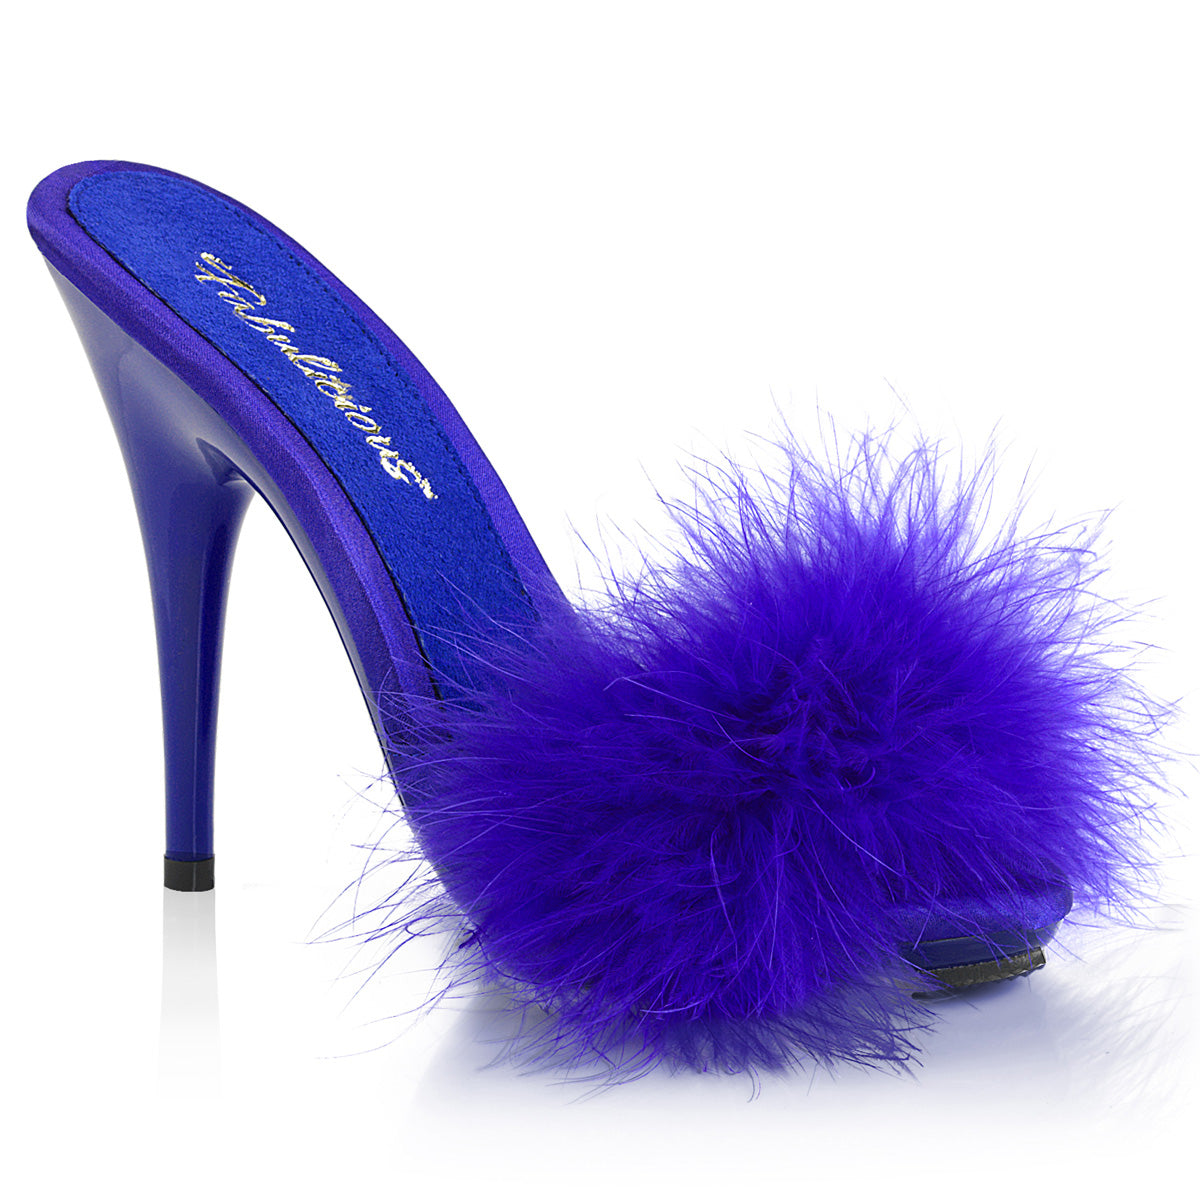 POISE-501F Fabulicious 5" Heel Blue Satin Marabou Sexy Shoes-Fabulicious- Sexy Shoes